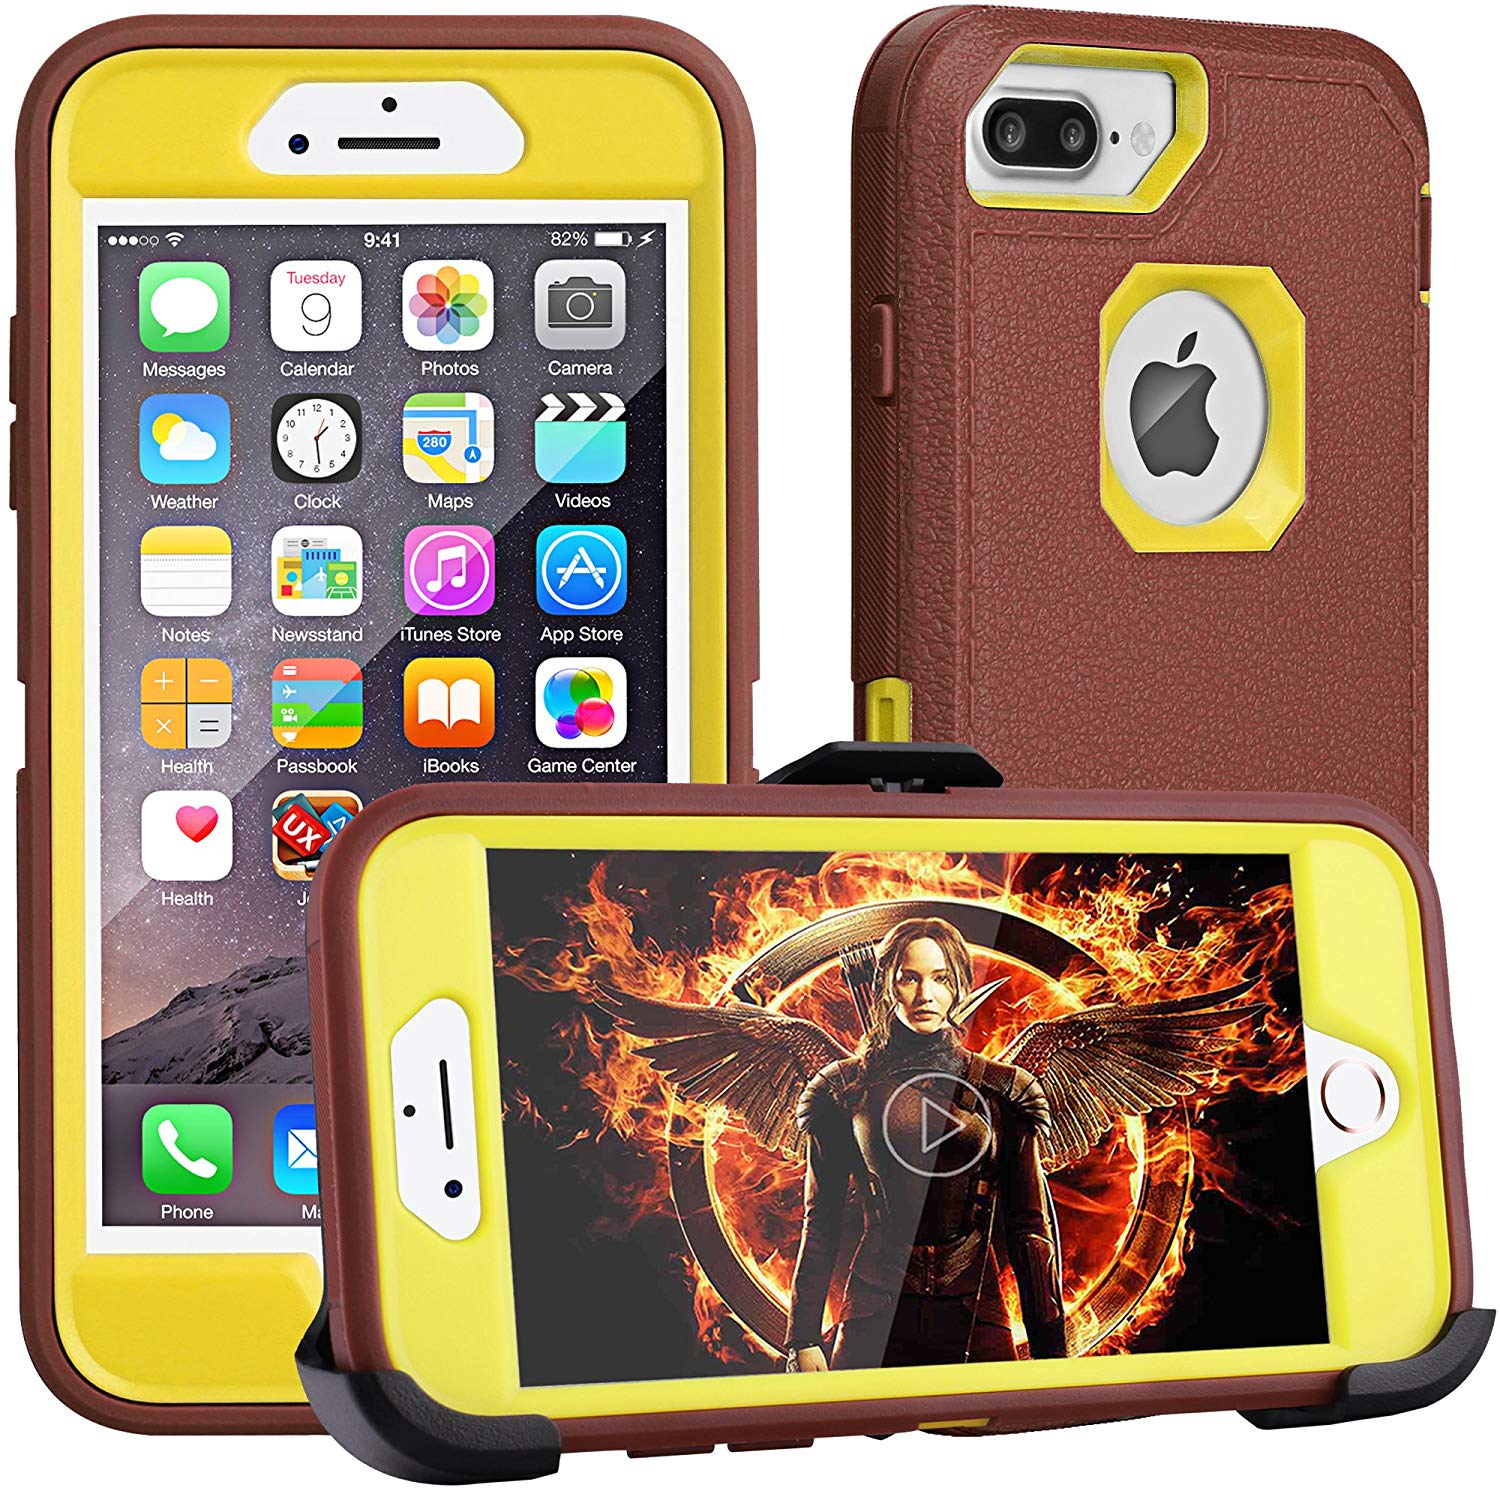 iPhone 8 Plus Case,iPhone 7 Plus Case,iPhone 6Plus Case,FOGEEK[Dust-Proof]Belt-Clip Heavy Duty Kickstand Cover[Shockproof] PC+TPU for Apple iPhone 7 Plus,iPhone 6/6s Plus(Brown and yellow) …